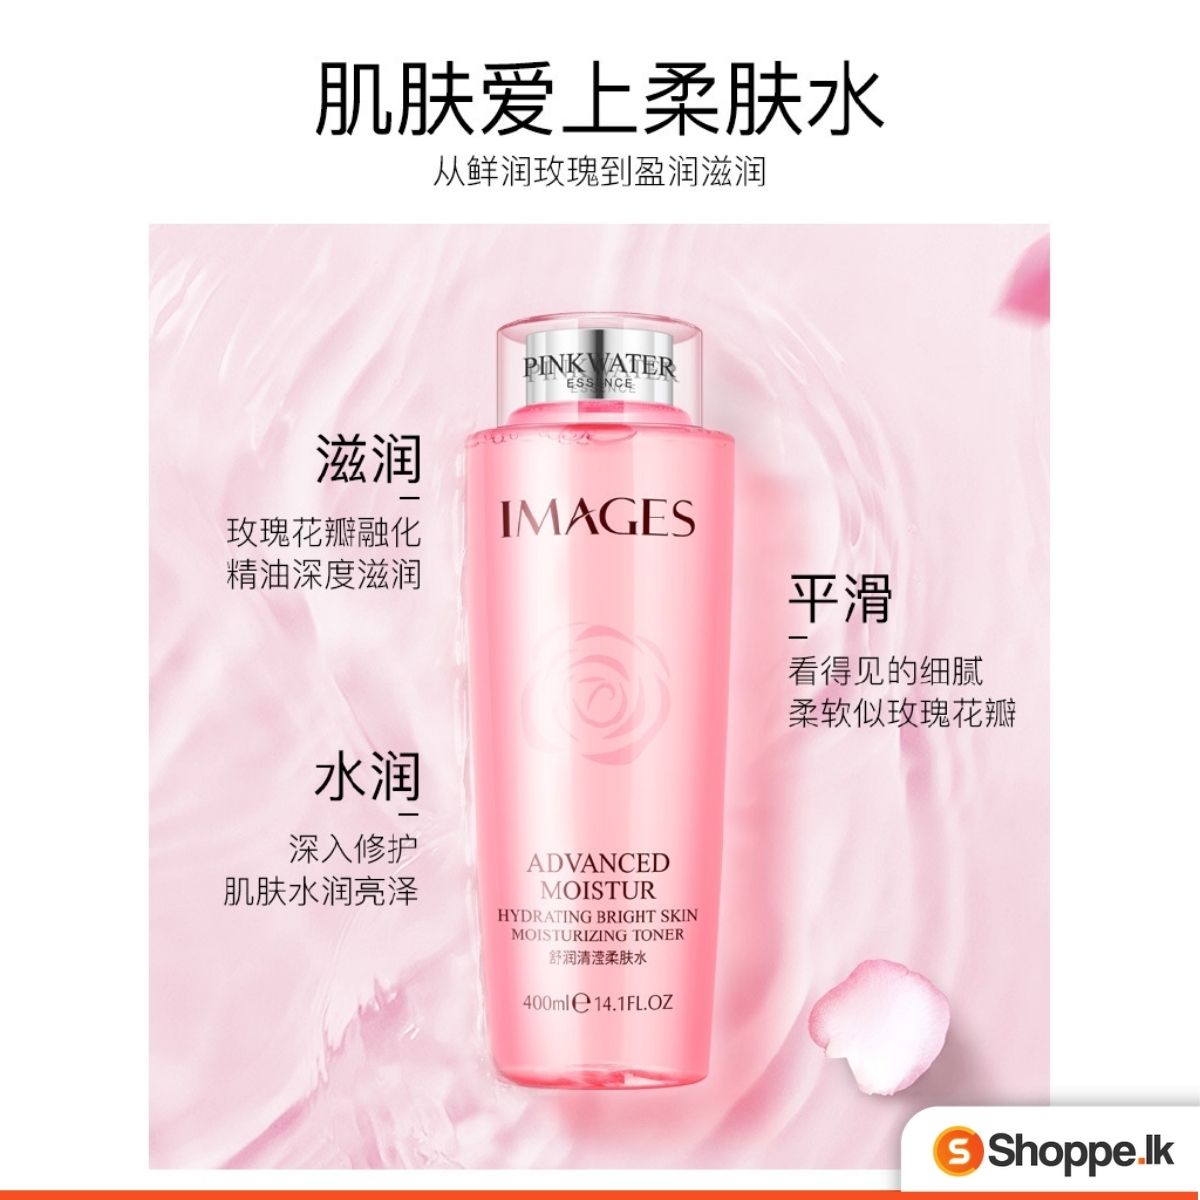 IMAGES Advanced Hydrating Rose Toner for Smooth & Brighter Skin - 400ml